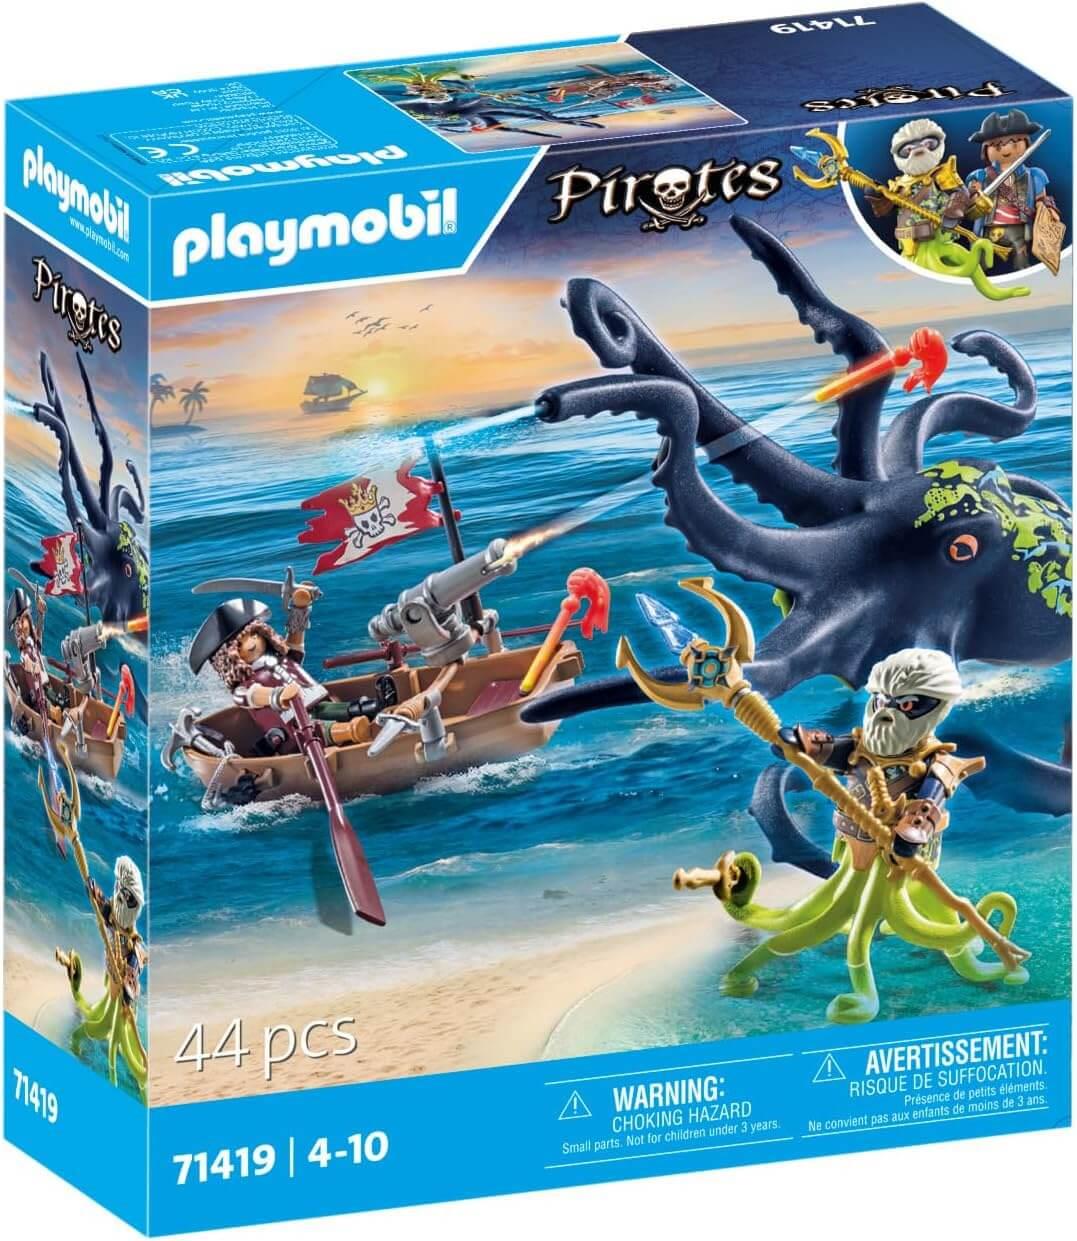 Playmobil Pirates 71419 Pirate vs. Deeper – Battle with the Giant Octopus